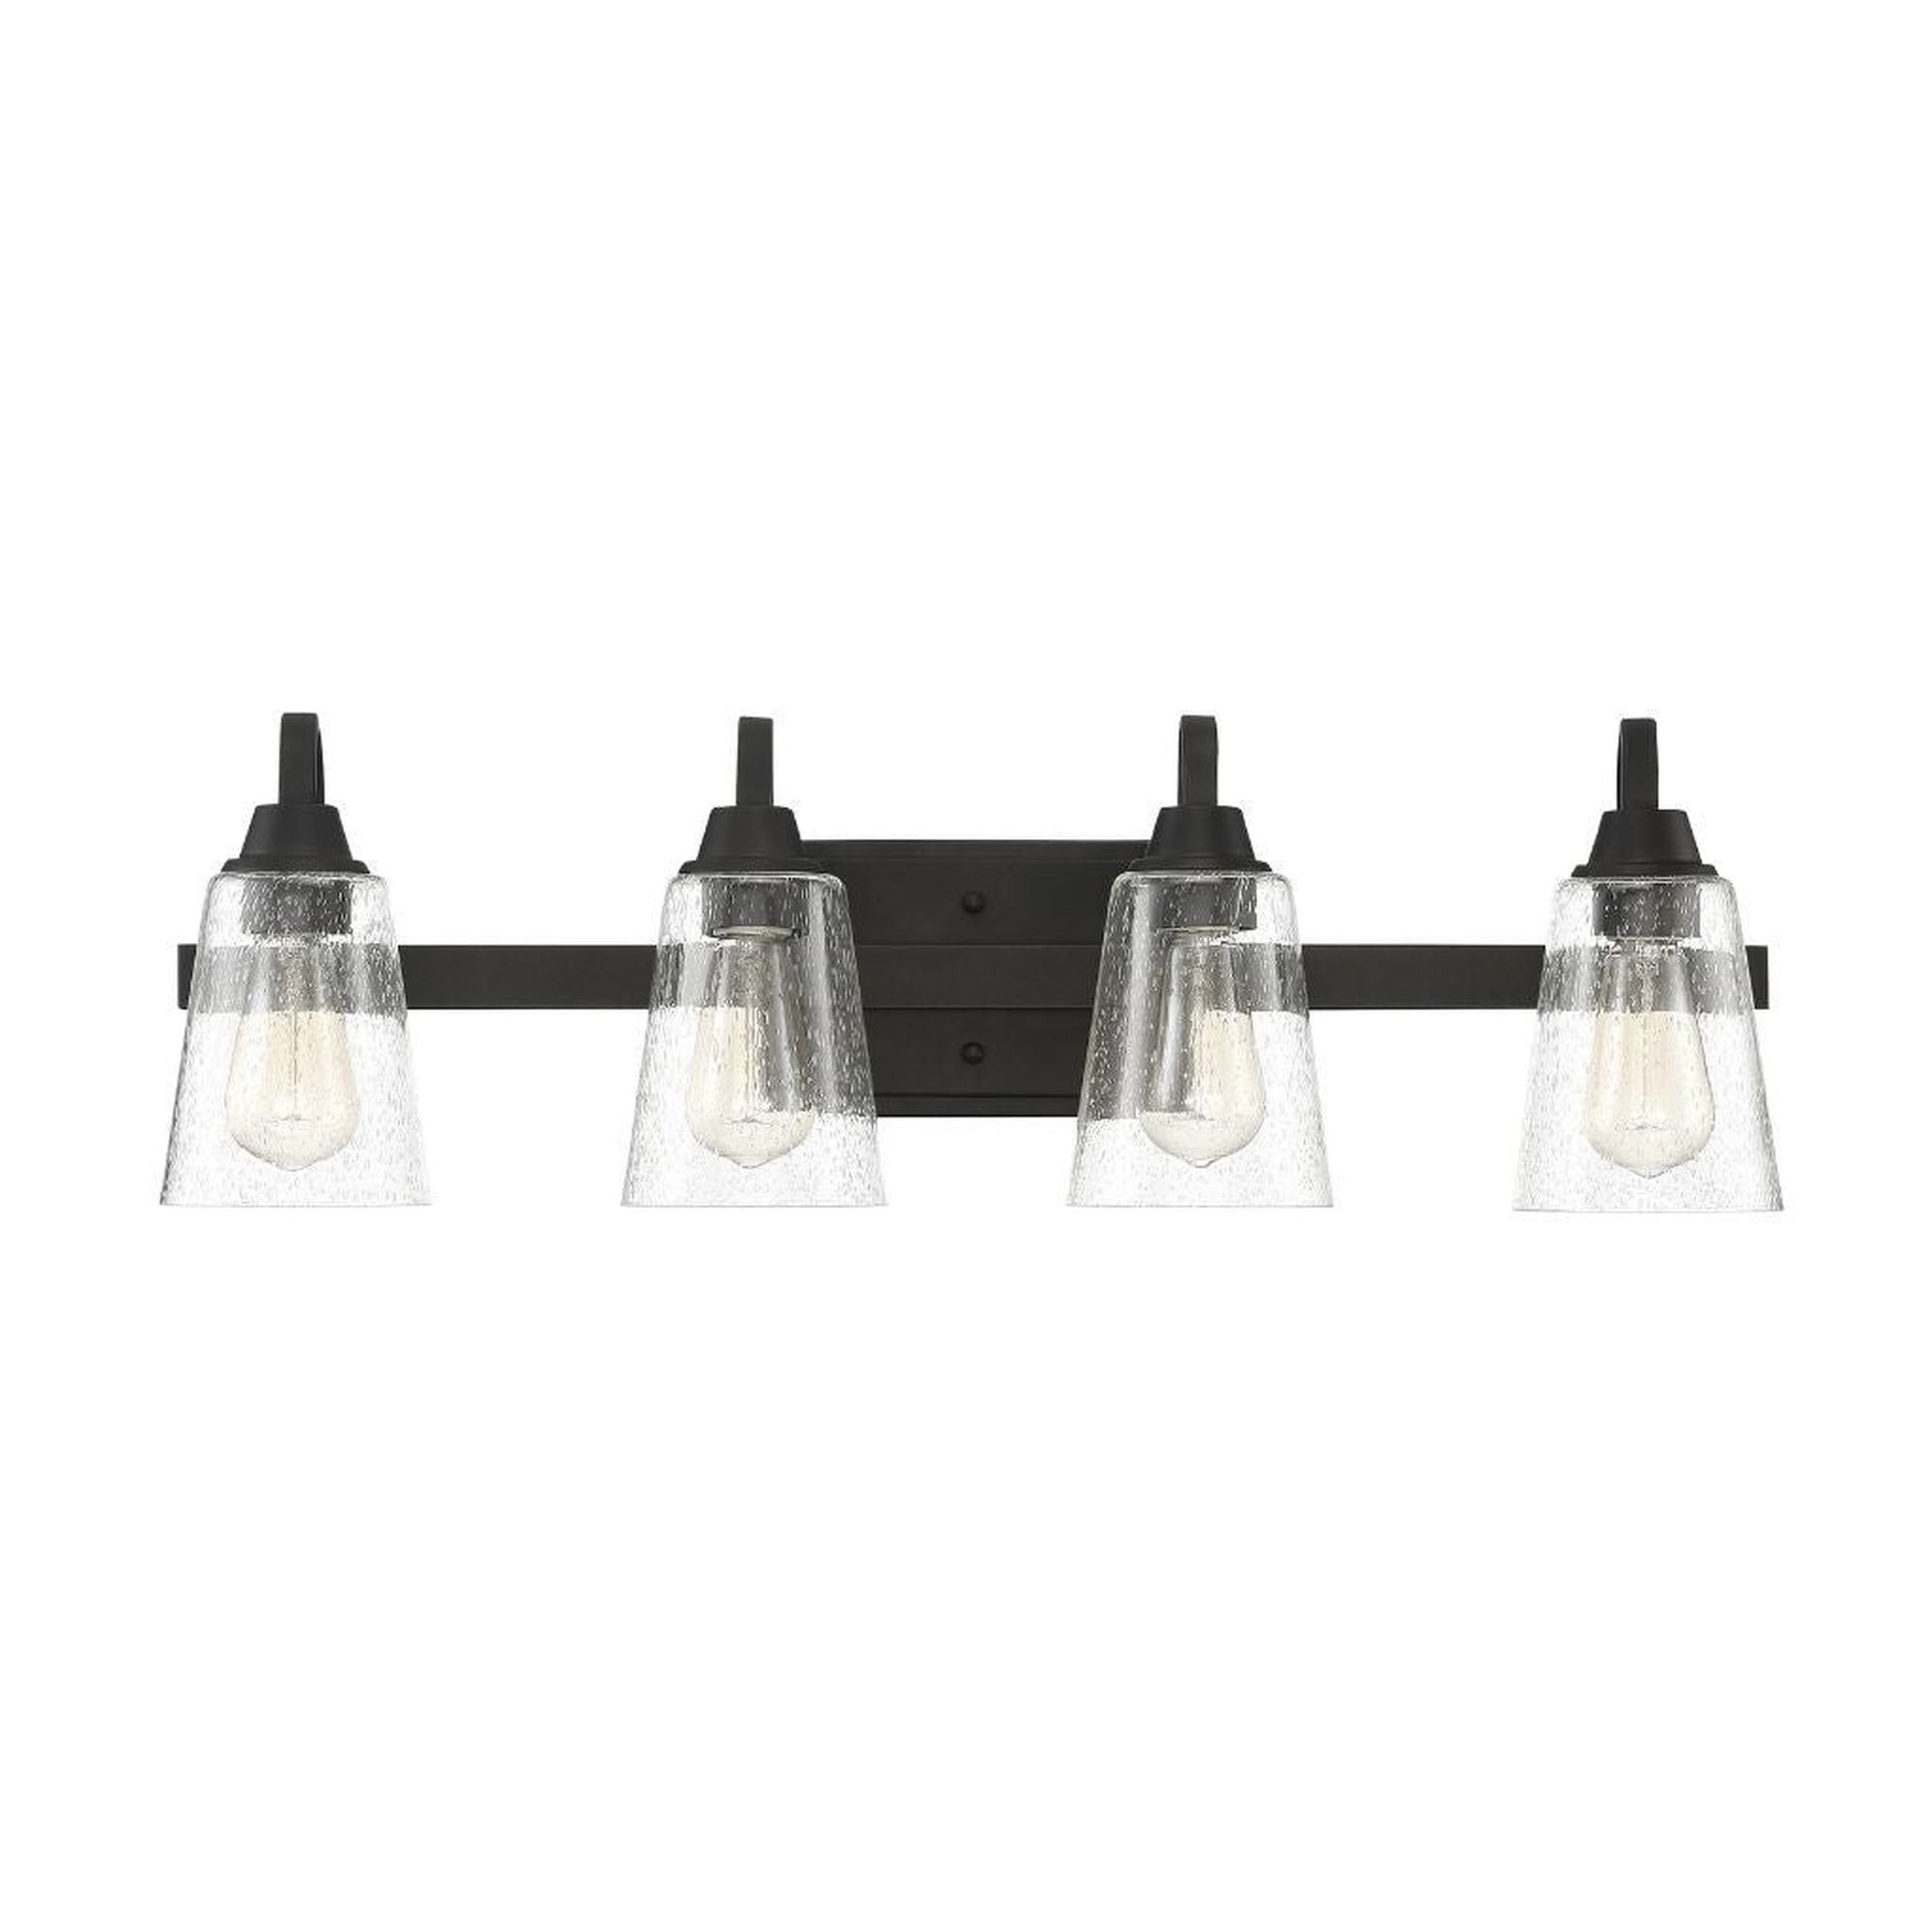 Craftmade Grace 28" 4-Light Espresso Vanity Light With Clear Seeded Glass Shades